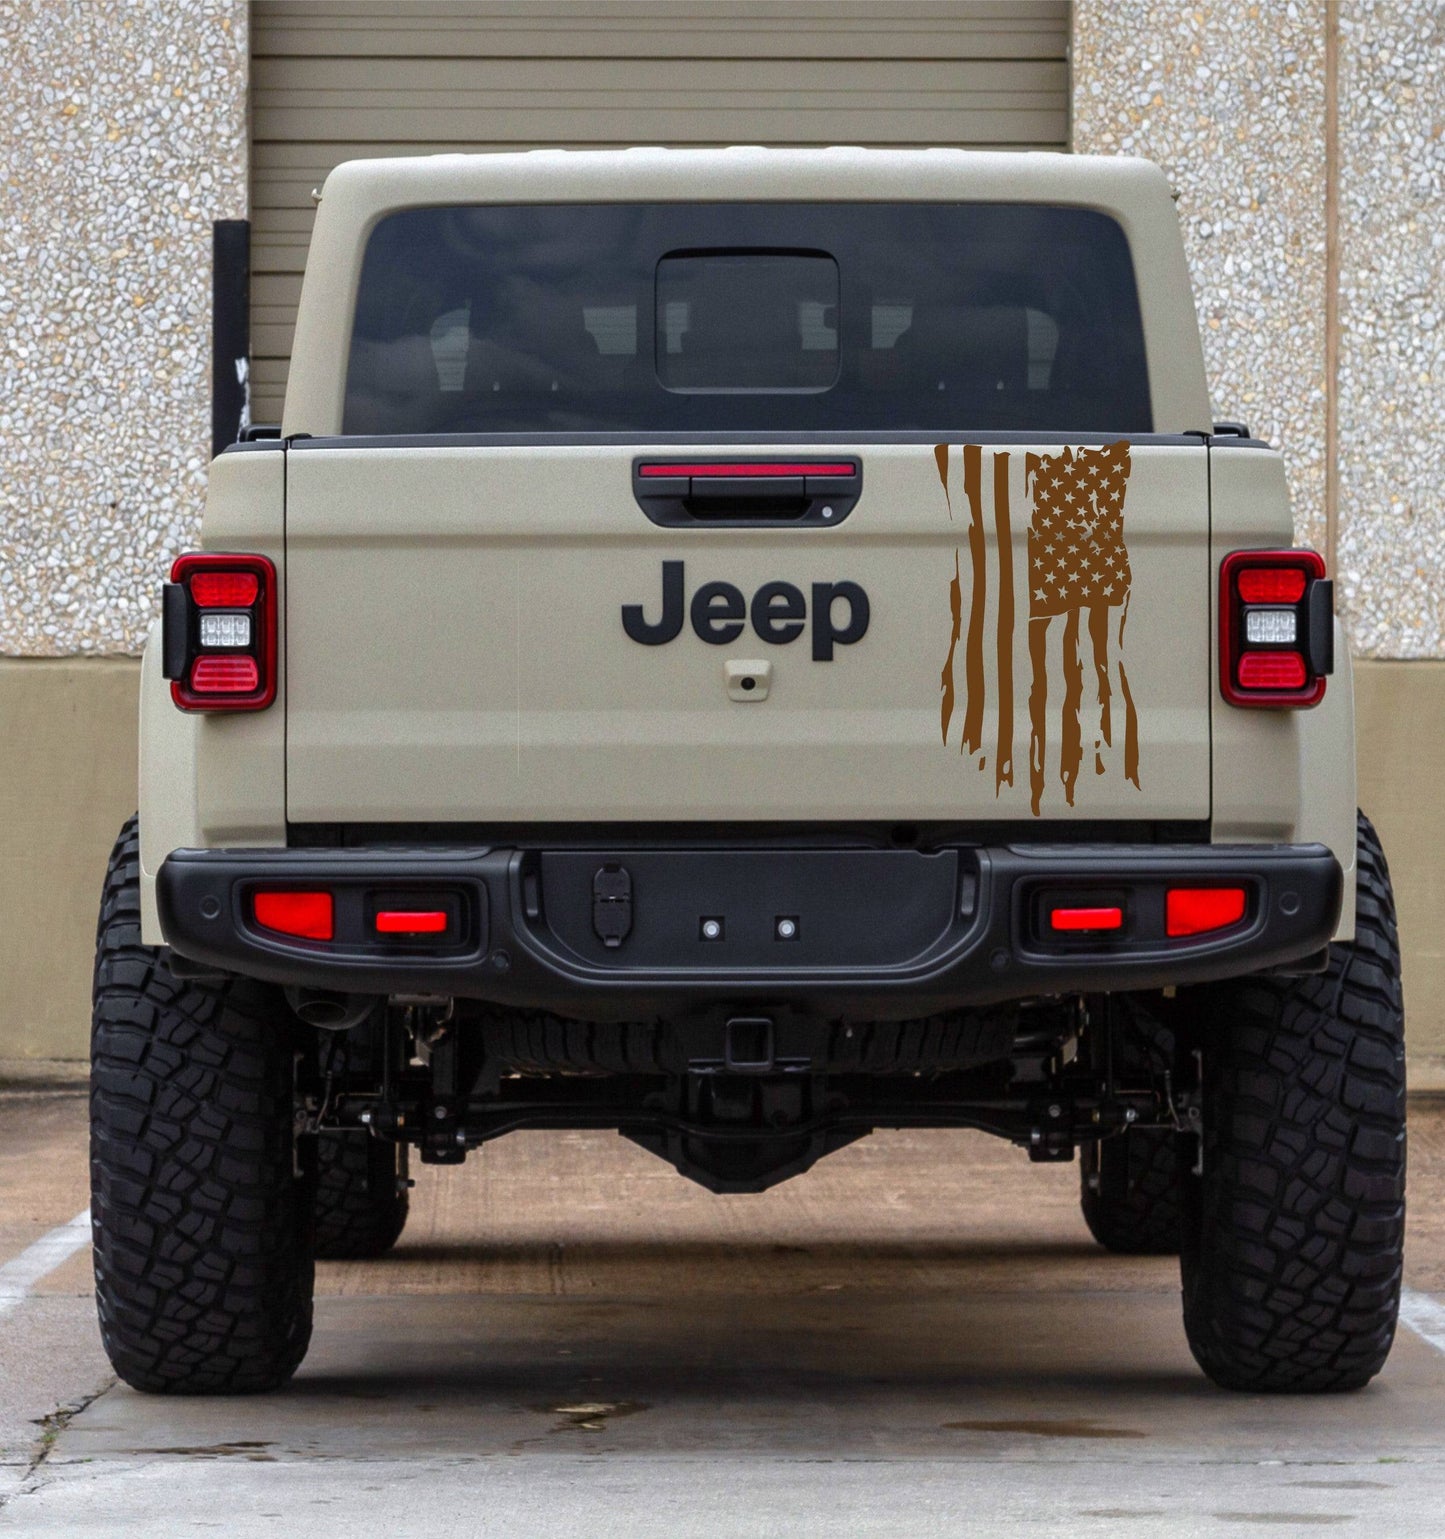 Distressed American Flag Vinyl Decal for Jeep Gladiator's Tailgate